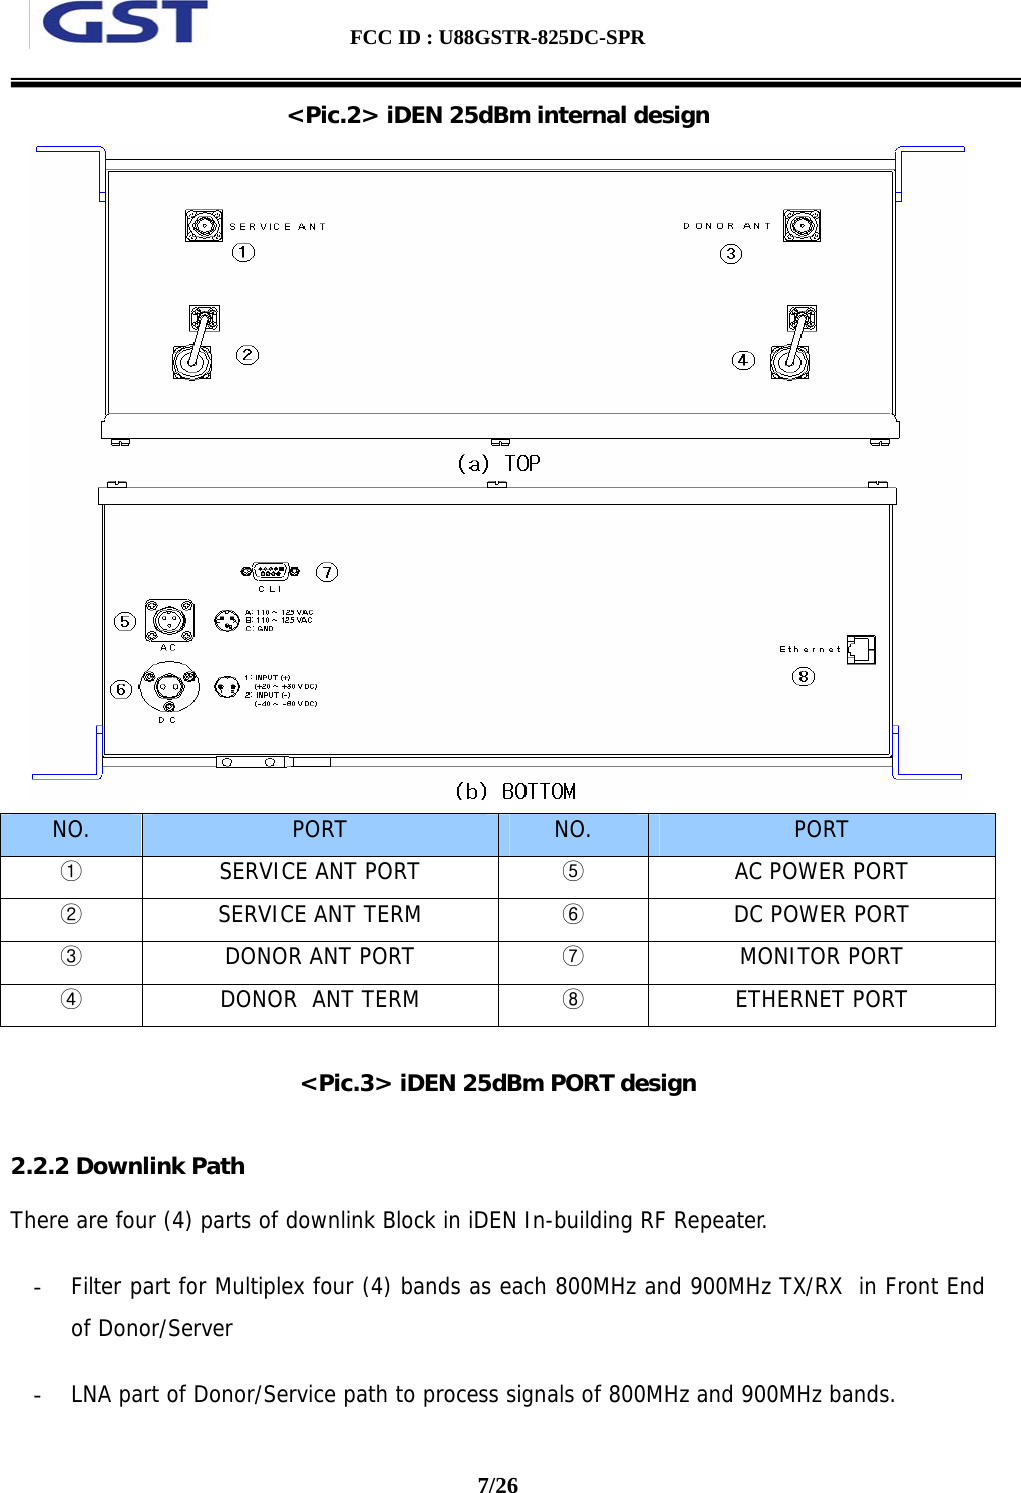  FCC ID : U88GSTR-825DC-SPR                                                                                          7/26  &lt;Pic.2&gt; iDEN 25dBm internal design  NO.  PORT  NO.  PORT ①  SERVICE ANT PORT  ⑤ AC POWER PORT ②  SERVICE ANT TERM  ⑥ DC POWER PORT ③  DONOR ANT PORT  ⑦ MONITOR PORT ④  DONOR  ANT TERM  ⑧ ETHERNET PORT  &lt;Pic.3&gt; iDEN 25dBm PORT design  2.2.2 Downlink Path There are four (4) parts of downlink Block in iDEN In-building RF Repeater. - Filter part for Multiplex four (4) bands as each 800MHz and 900MHz TX/RX  in Front End of Donor/Server  - LNA part of Donor/Service path to process signals of 800MHz and 900MHz bands.  